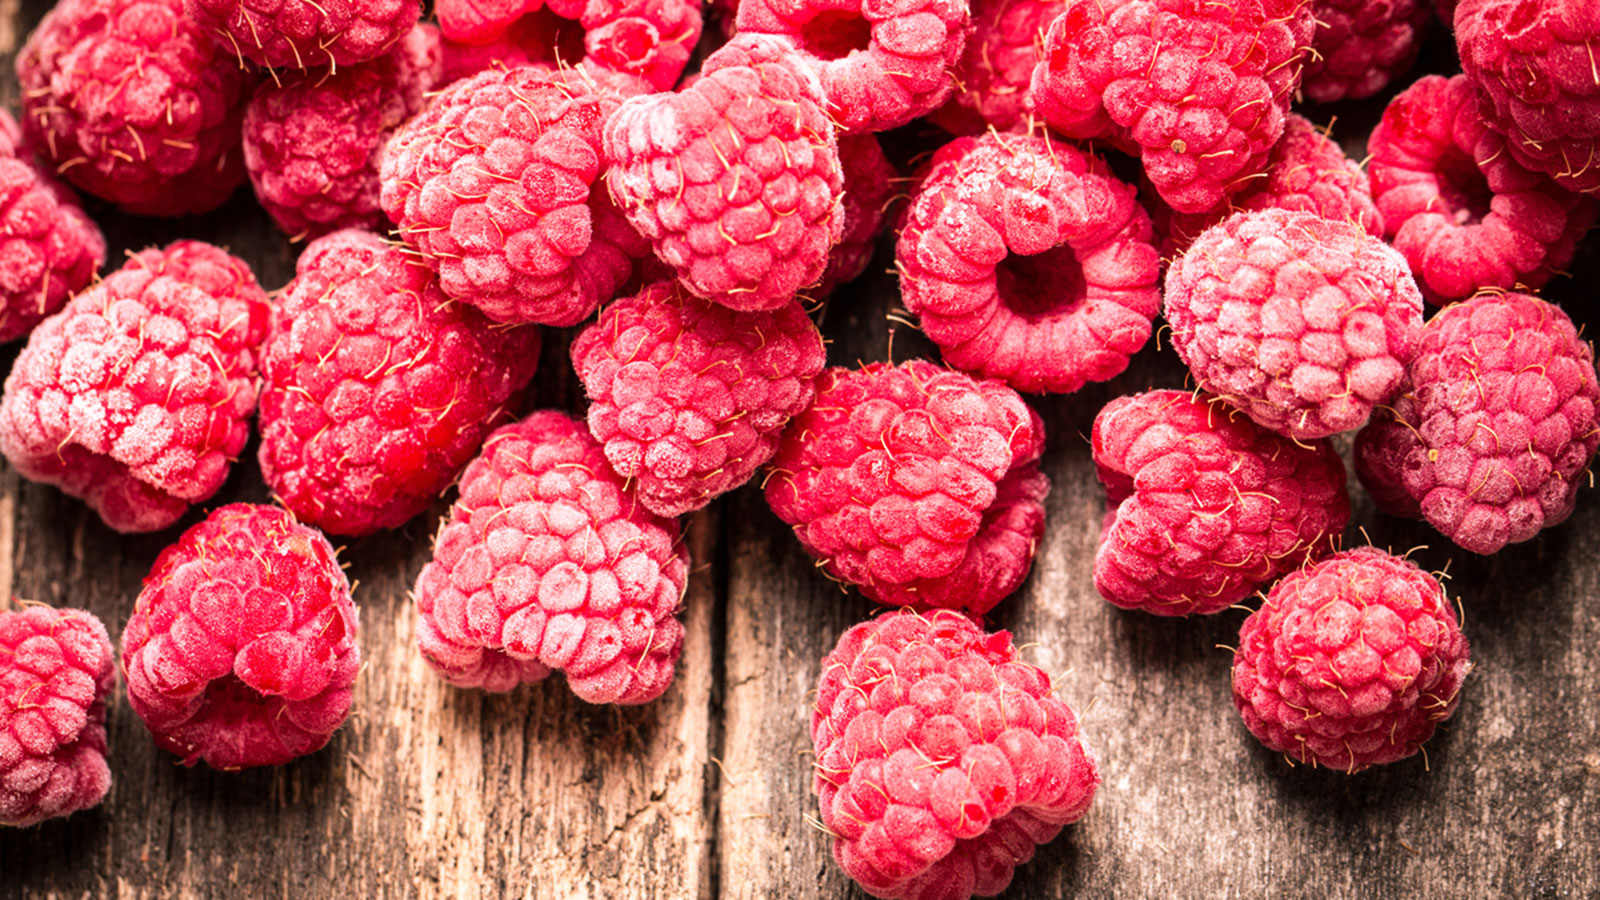 🍓 Sorry, But If You Can’t Pass This Plural Word Test, You Can Never Have Fruits Again Raspberry